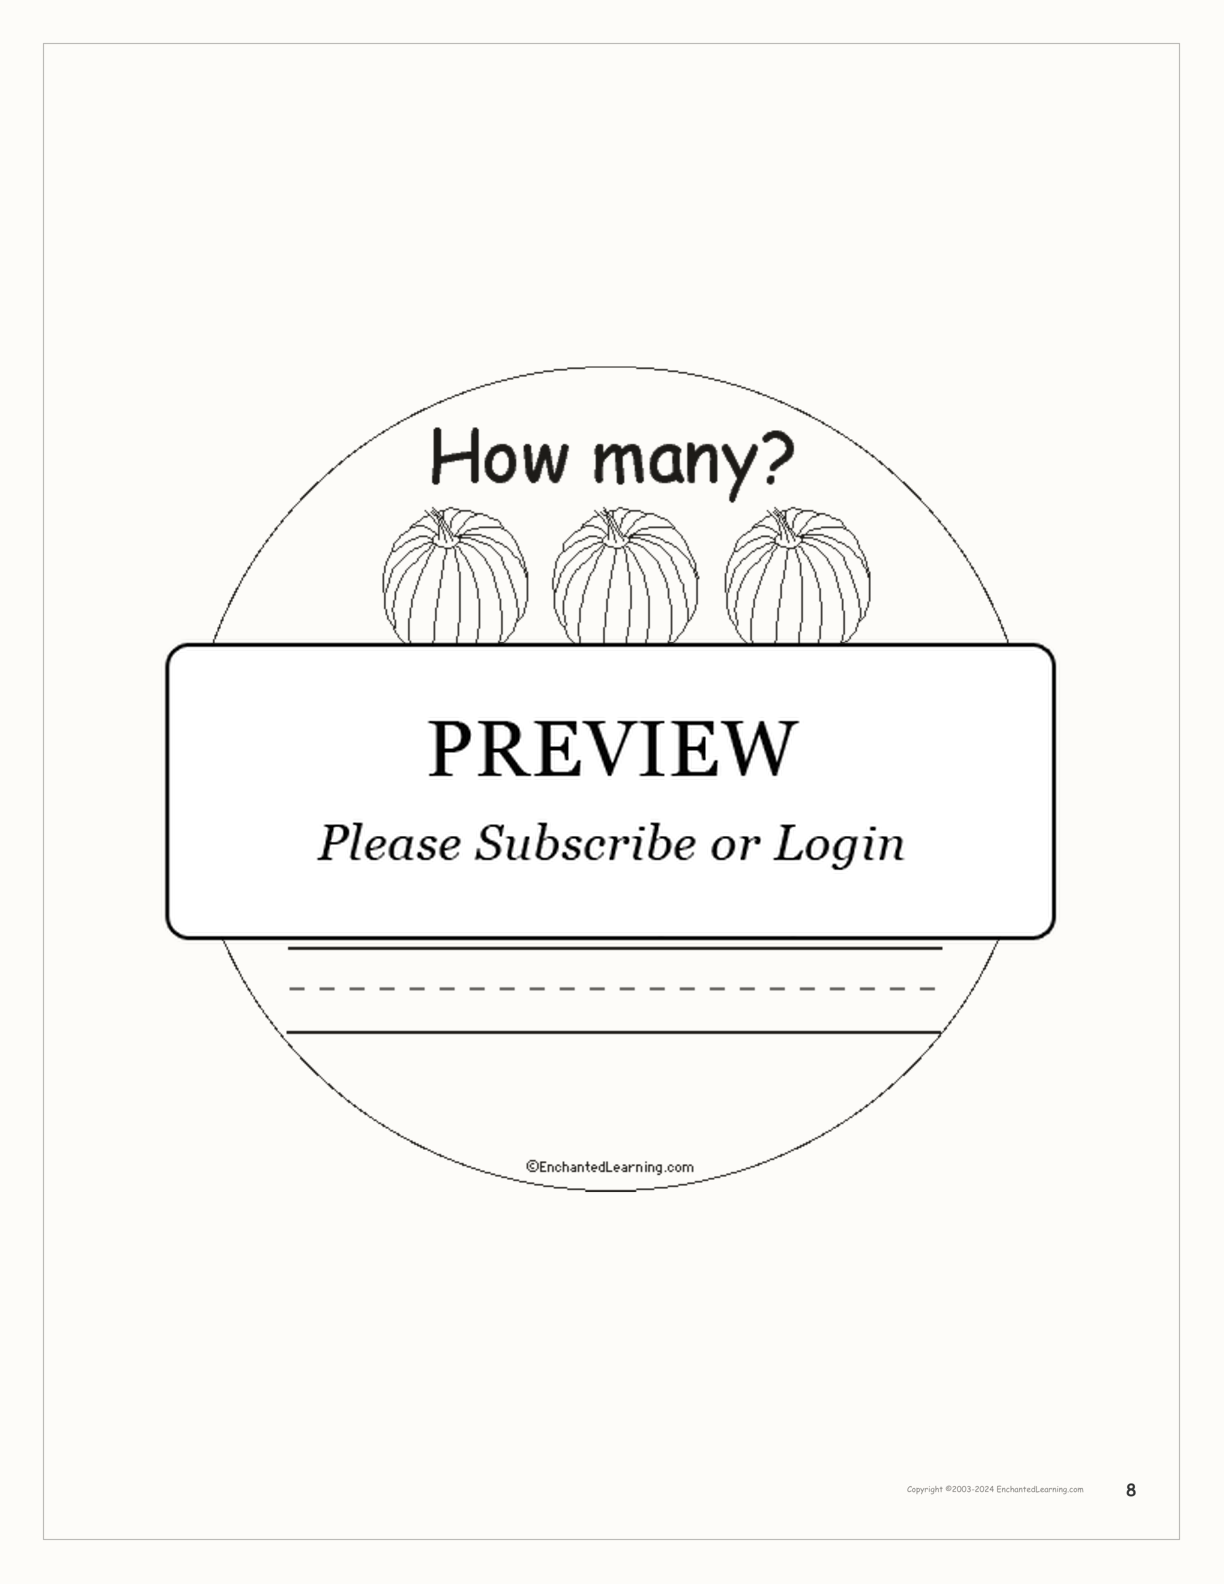 How Many Pumpkins? interactive printout page 8